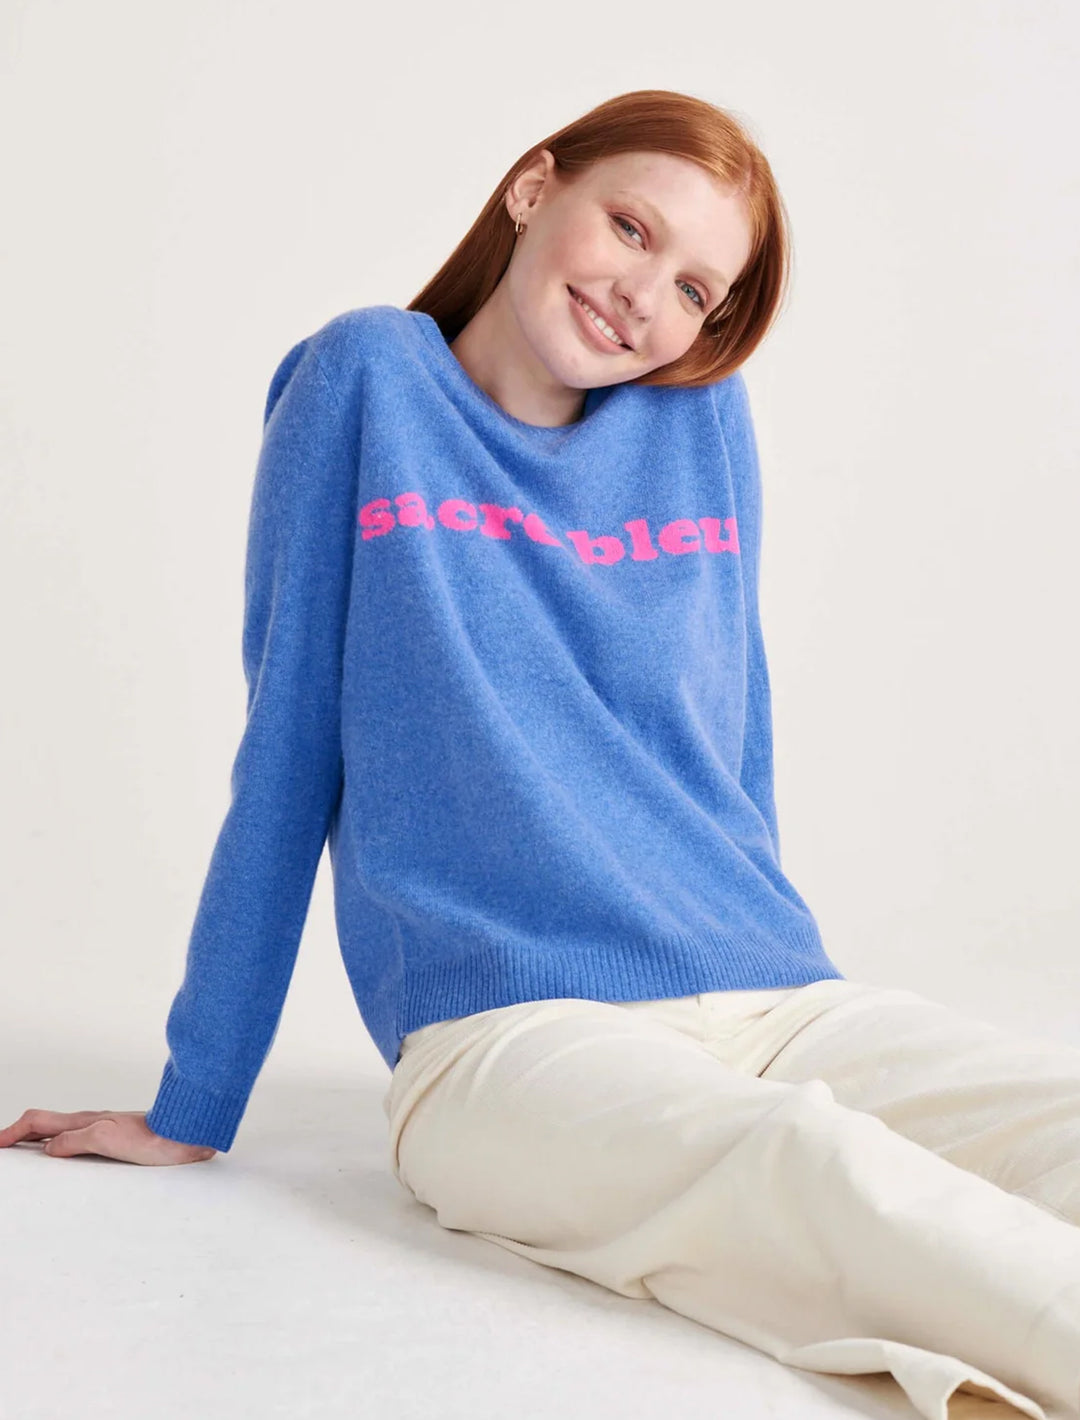 Model wearing Jumper 1234's sacre bleu crew in periwinkle and hot pink.